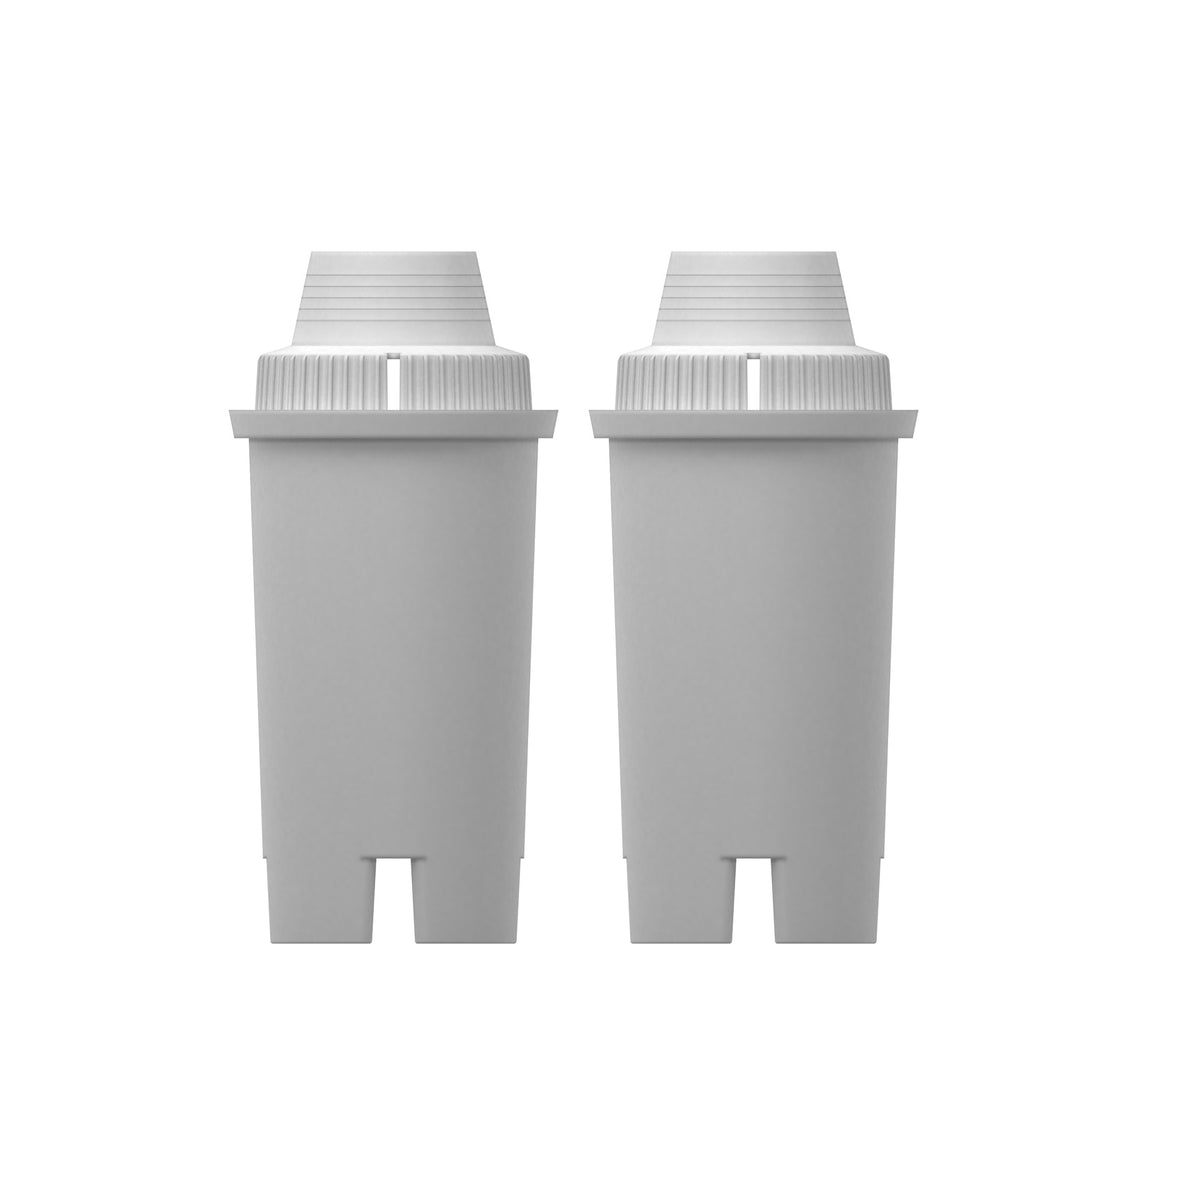 Replacement Alkaline Filters for Drinkpod Pitchers and Dispensers- 2 Pack